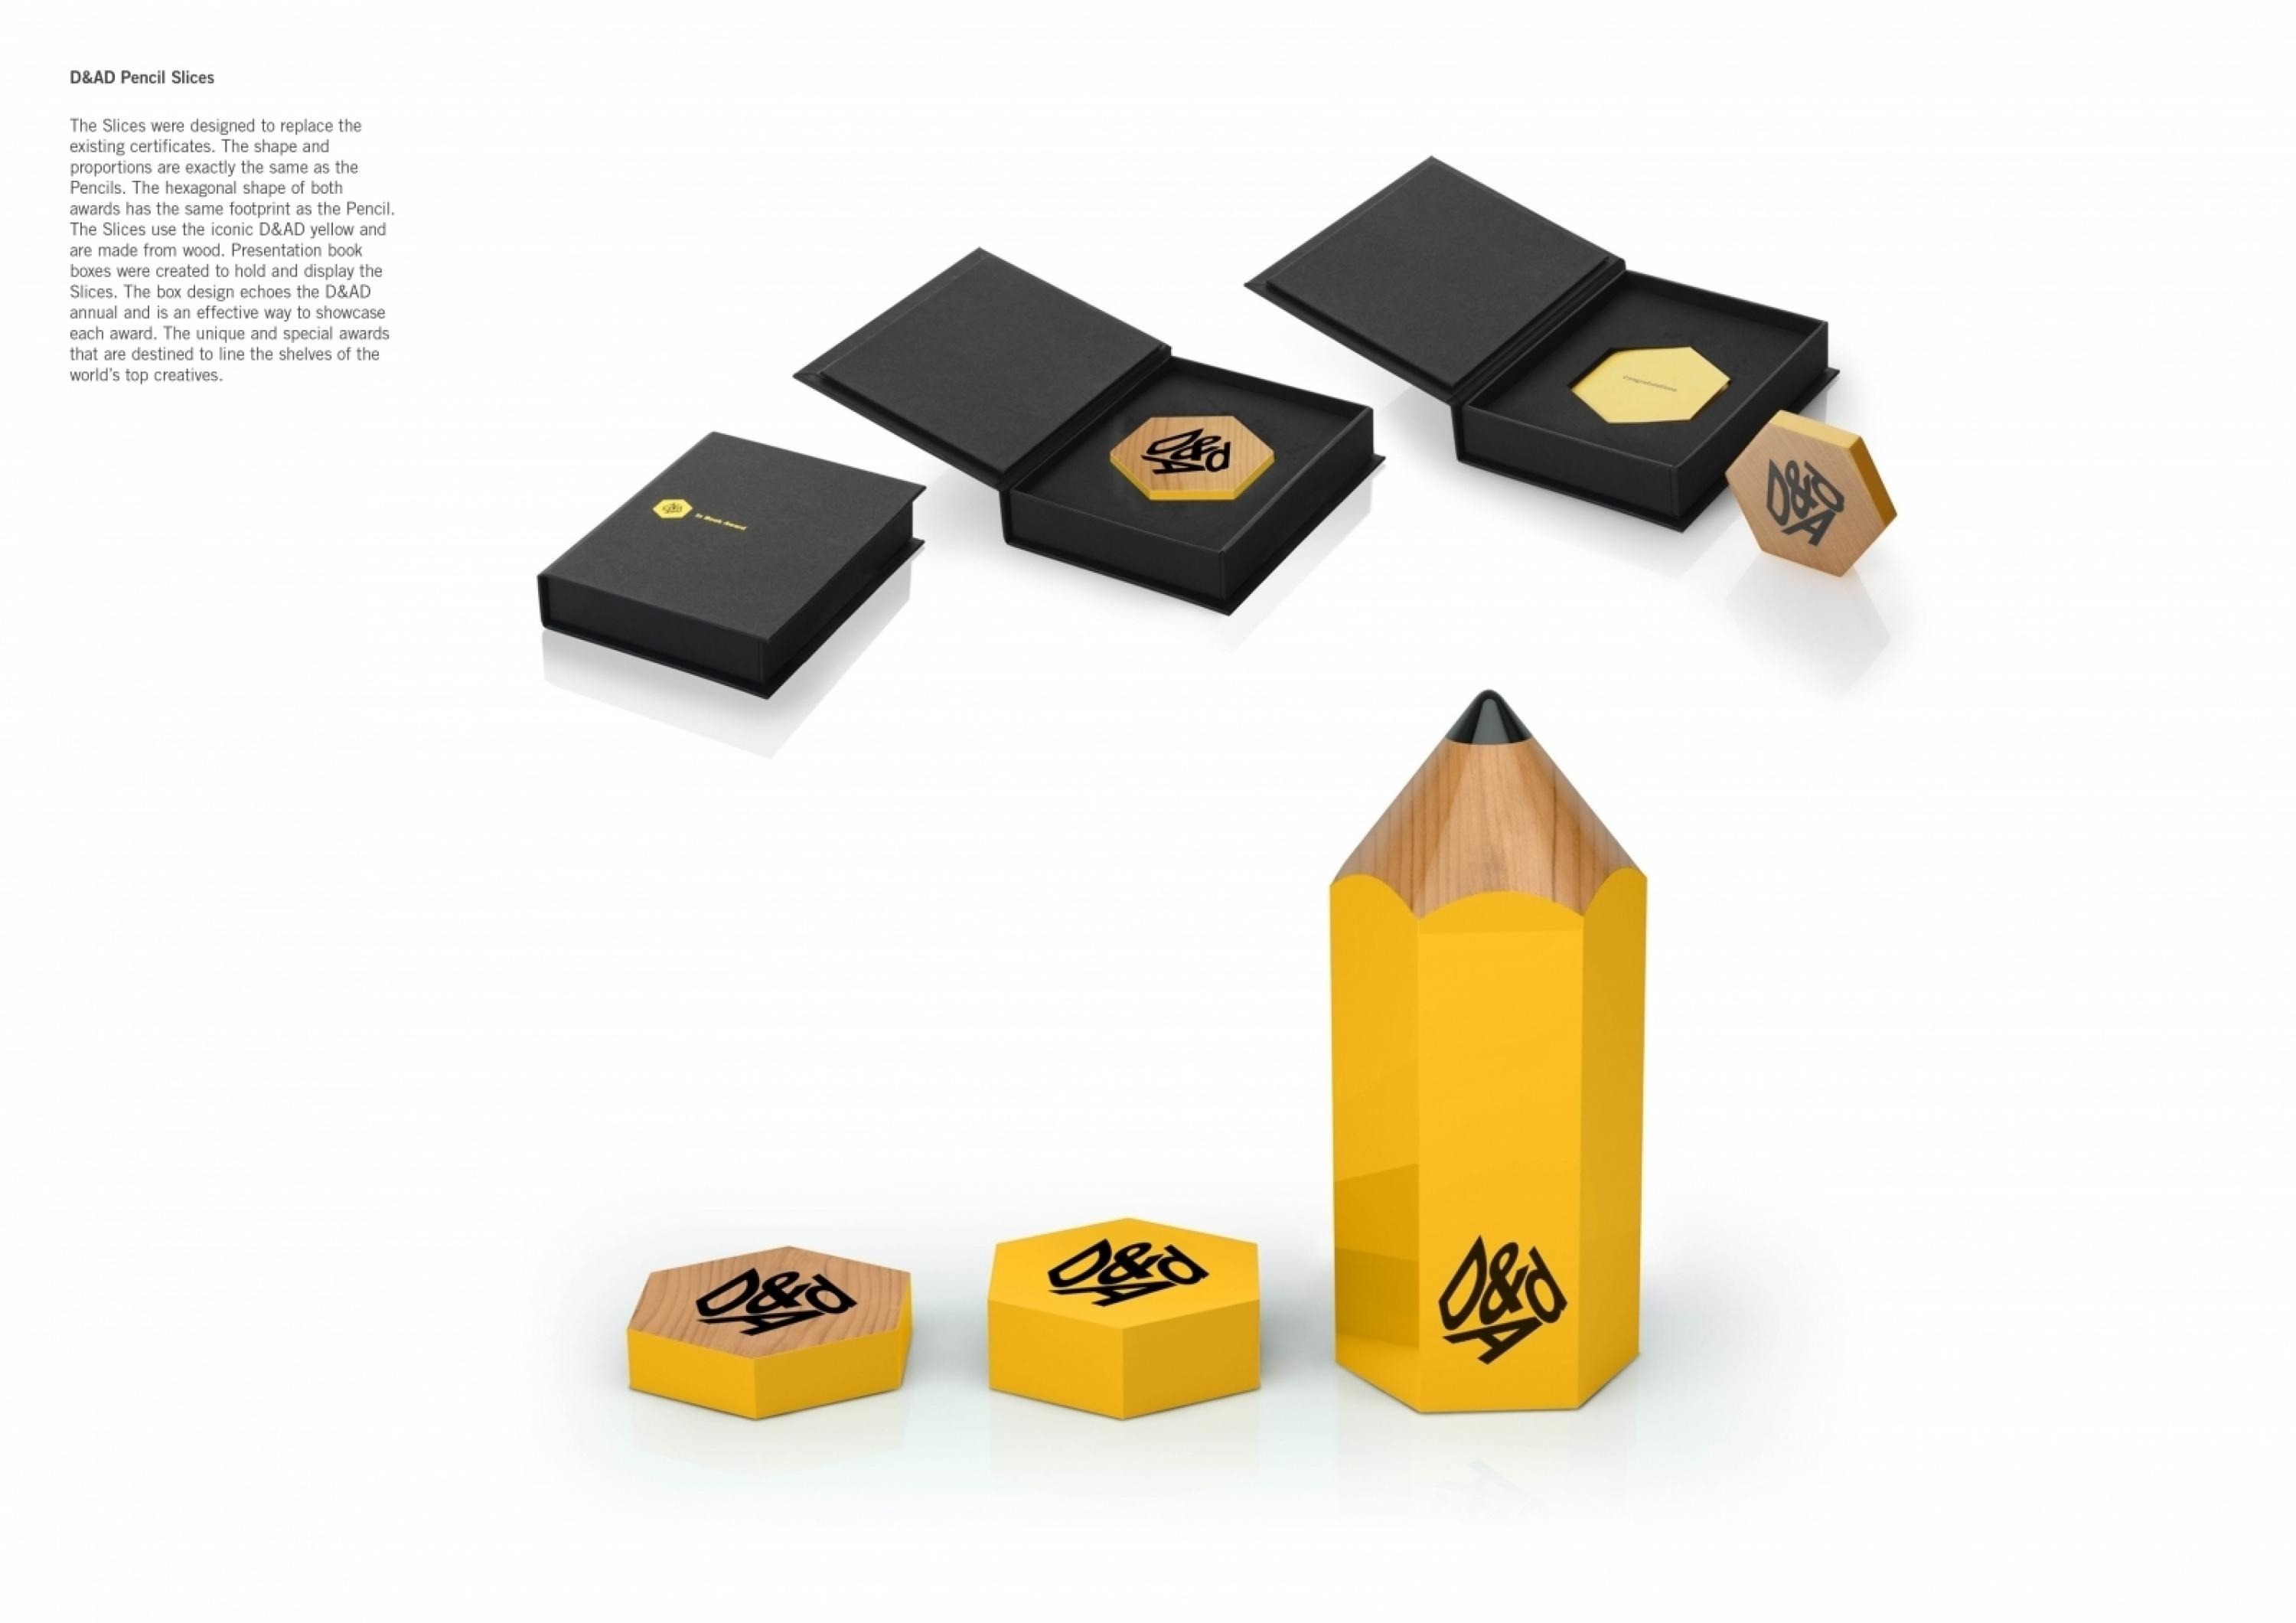 D&AD IN BOOK AND NOMINATION AWARDS